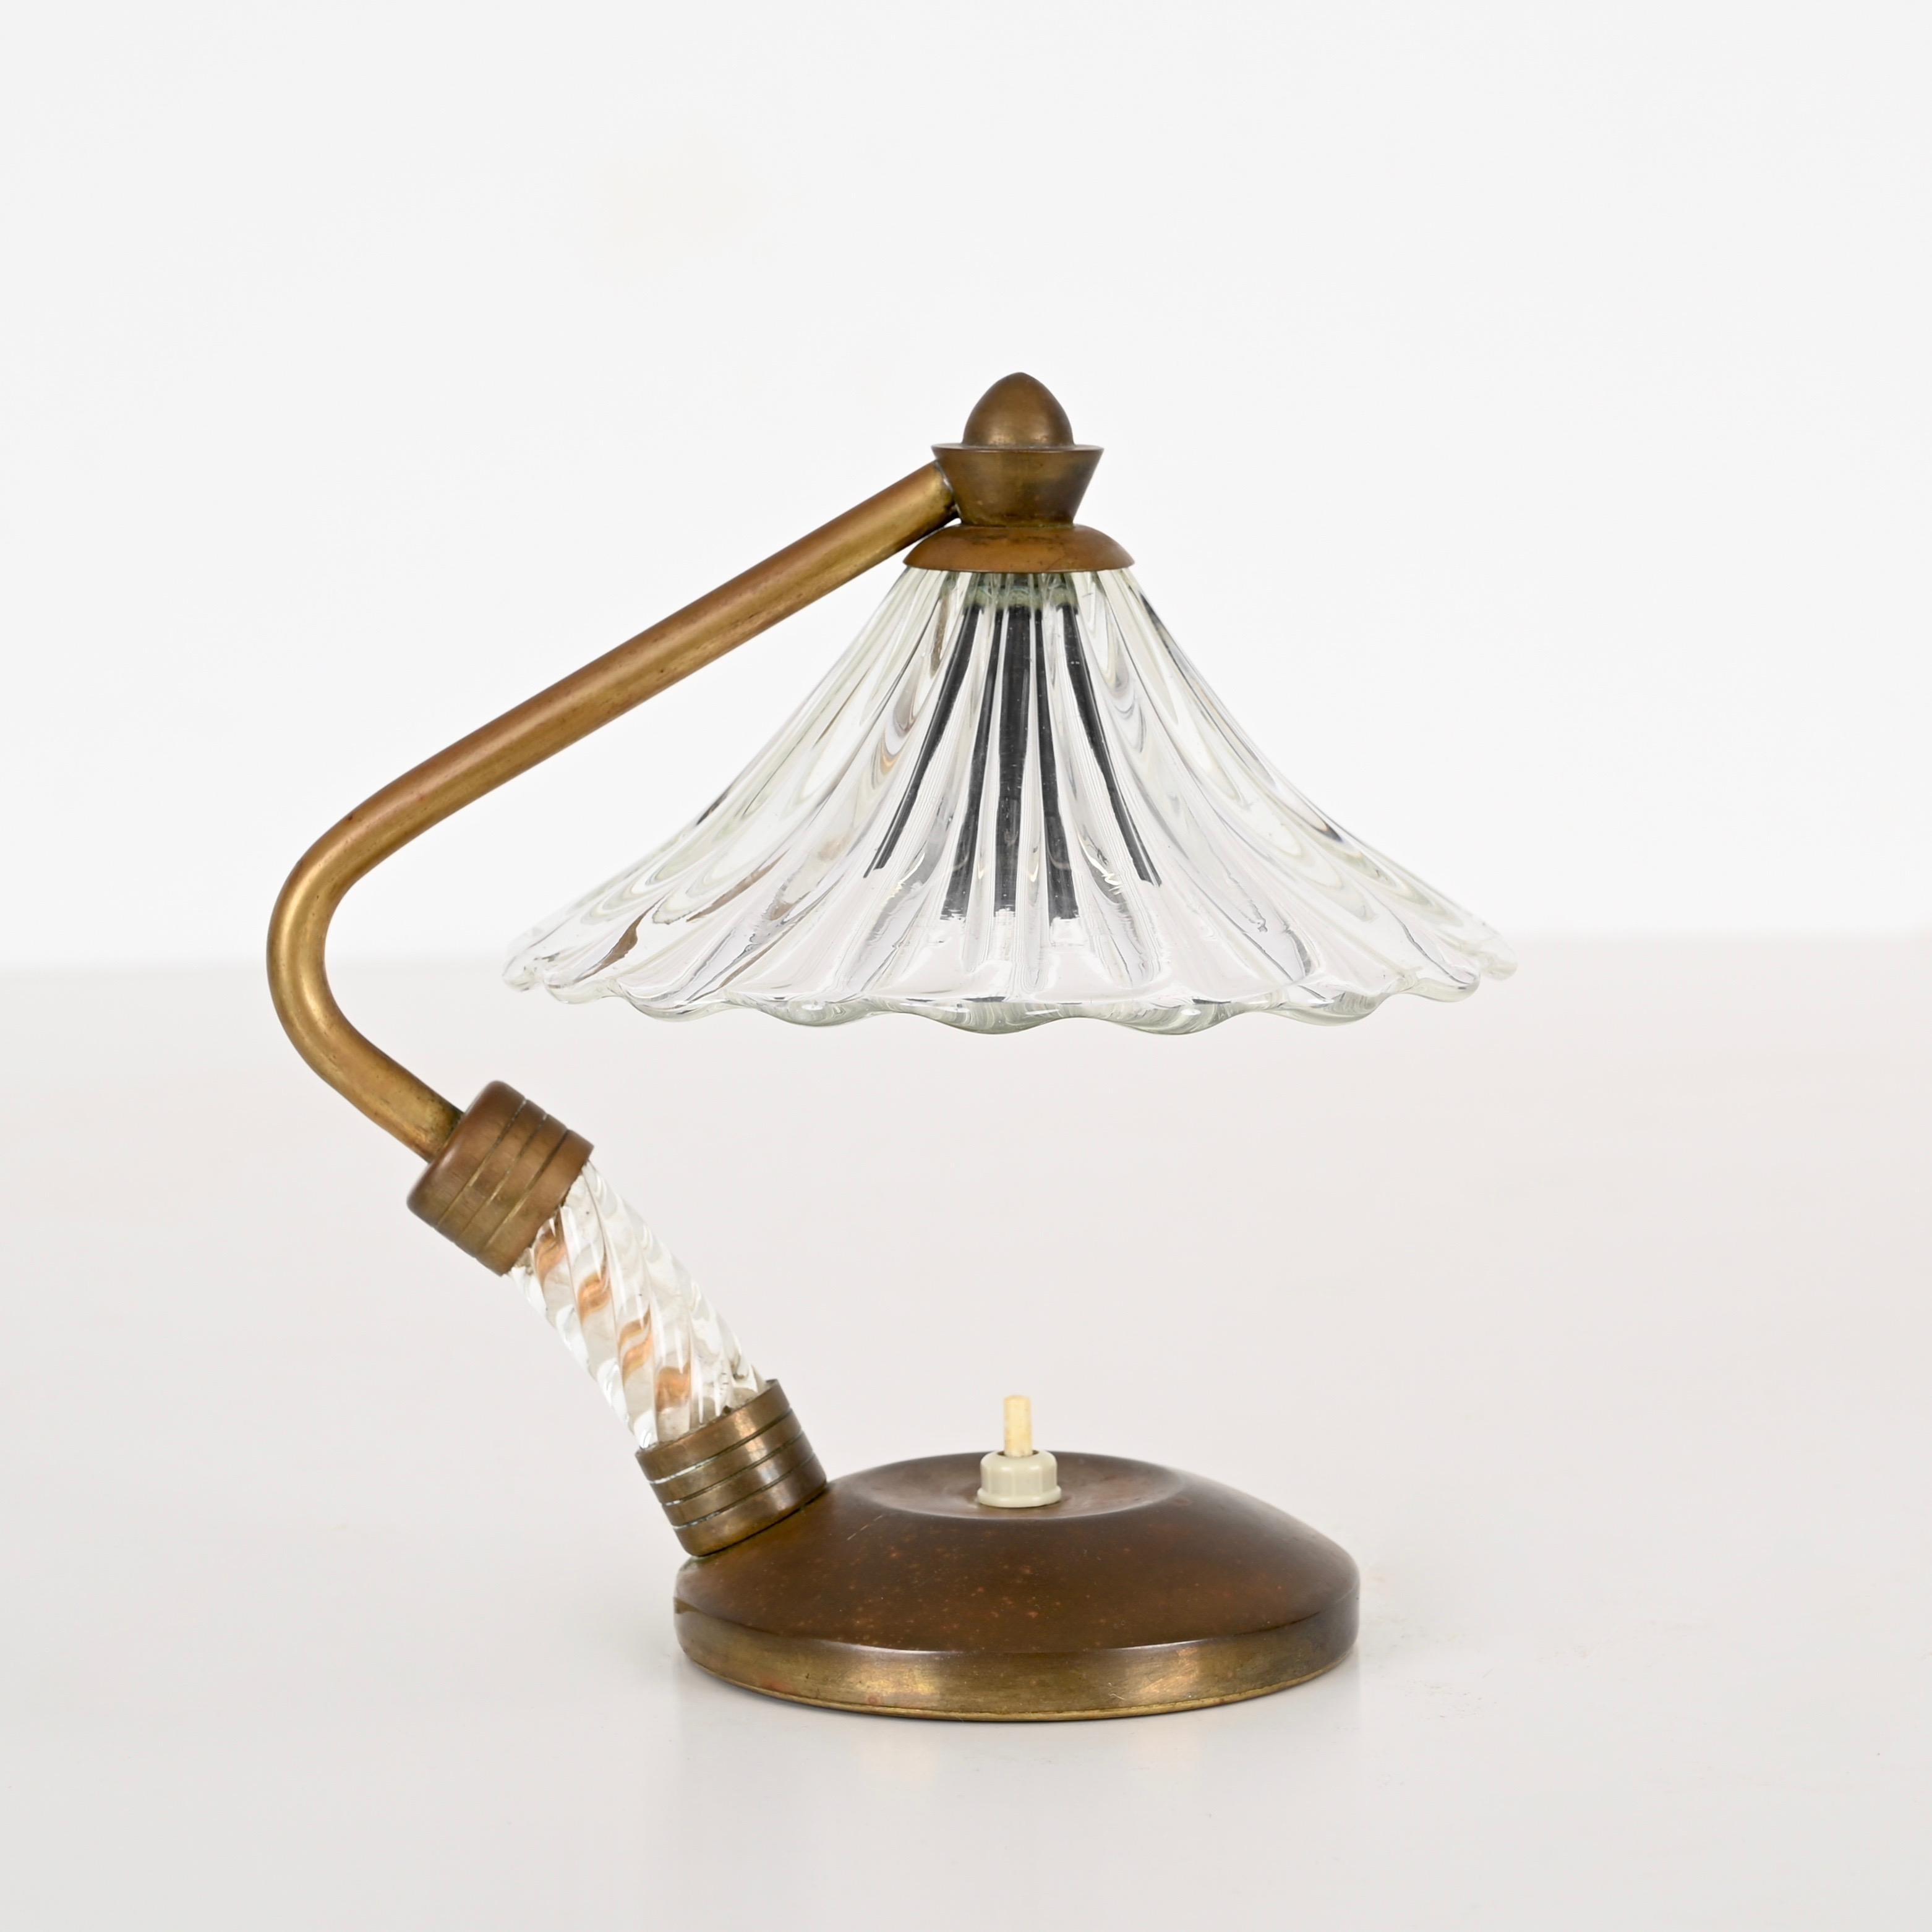 Gorgeous table lamp made in a combination Murano glass and brass. This incredibly elegant lamp was designed by Ercole Barovier and made in Italy during the early '40s.  

The shade of this finely crafted lamp recalls the shape of a bellflower. The